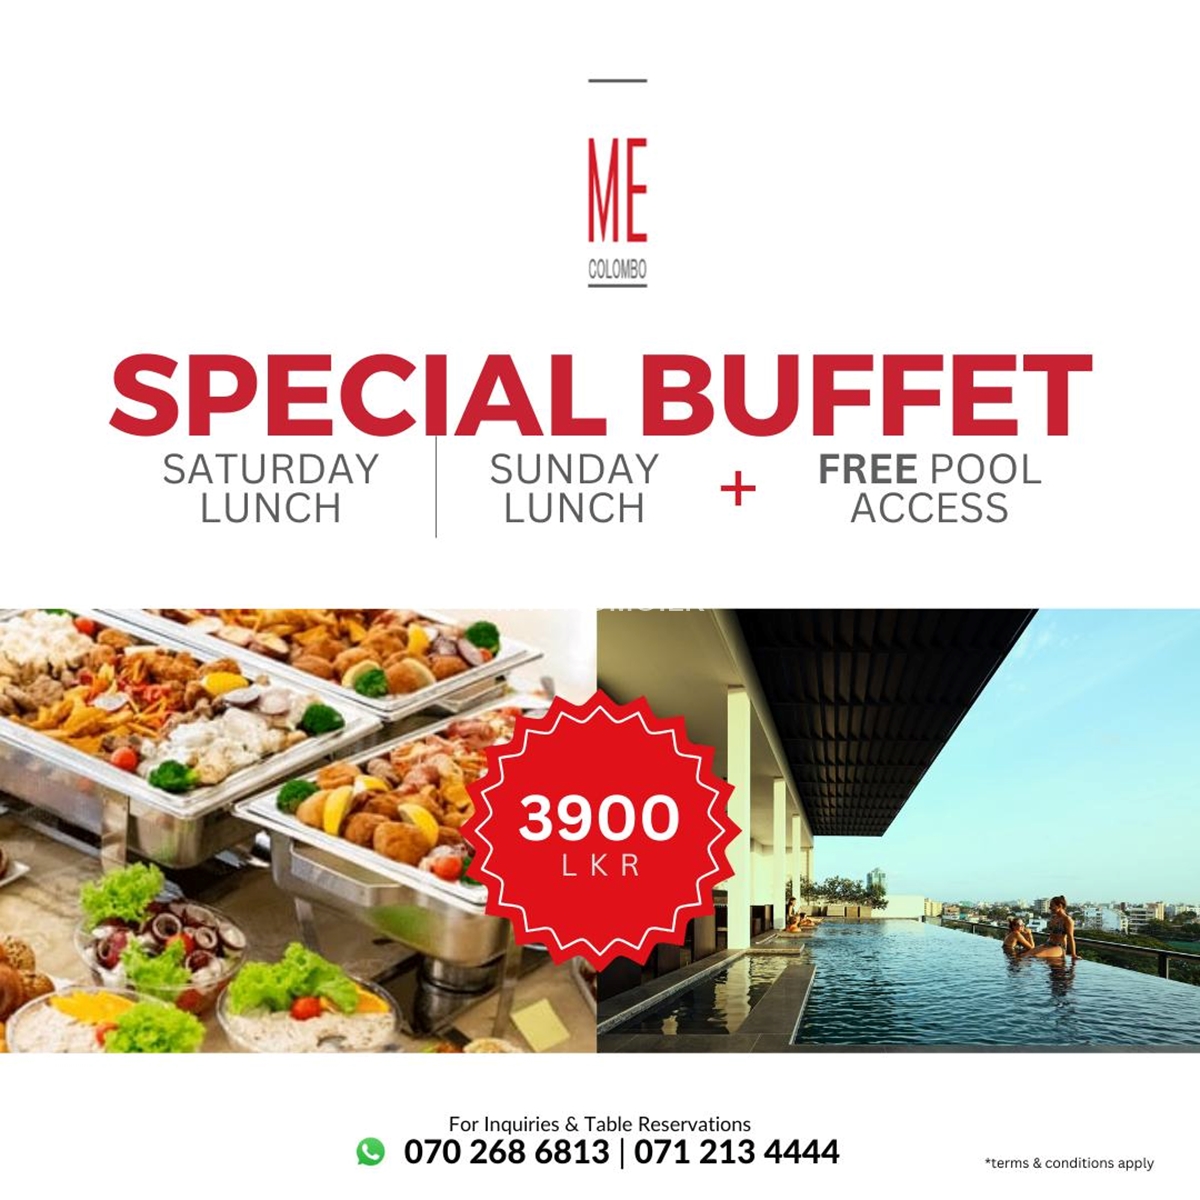 Weekend Lunch Buffet at ME Colombo